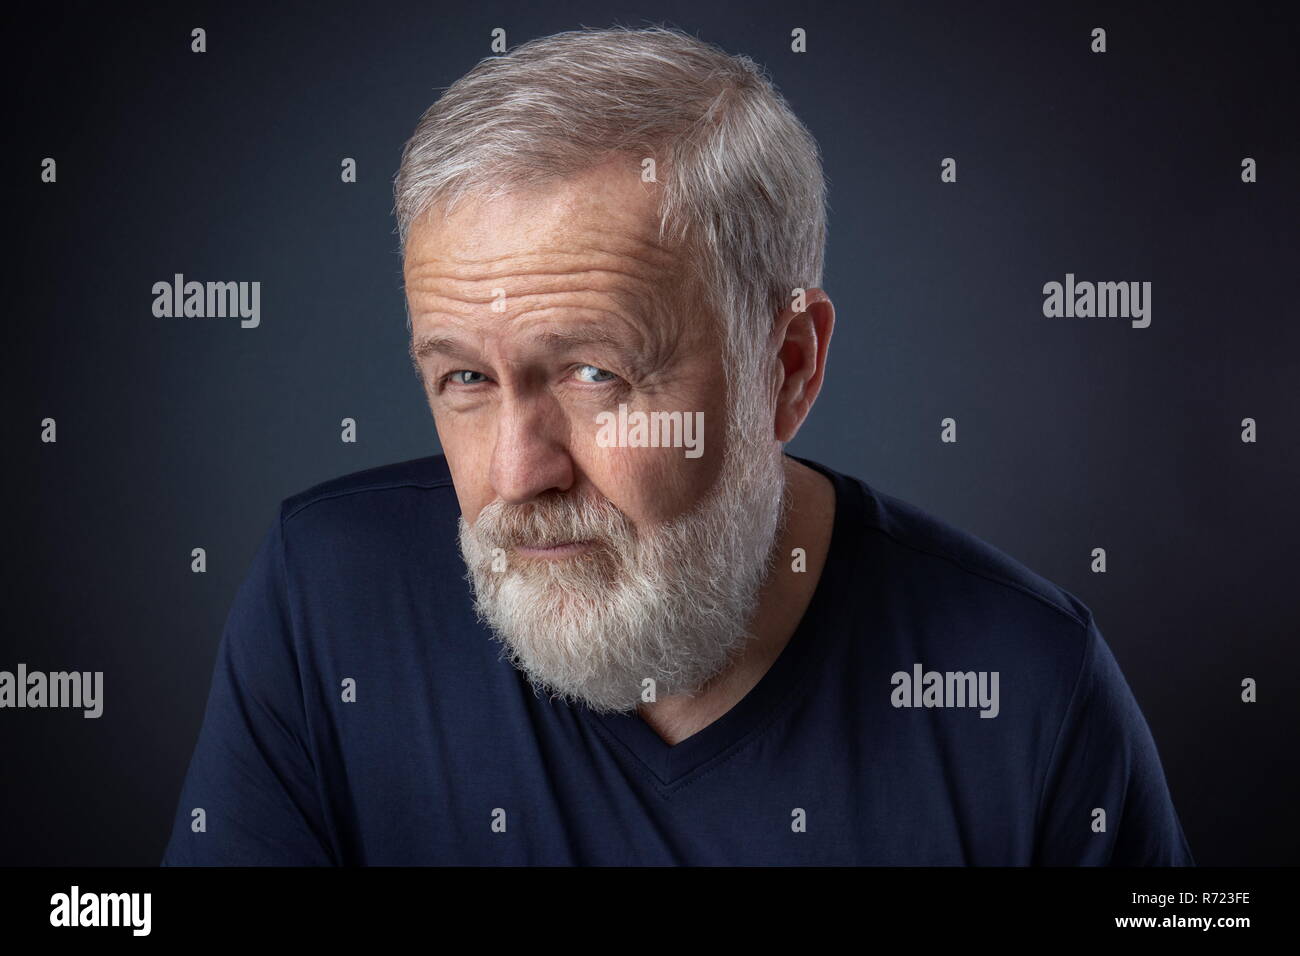 Portrait of senior with gray beard and a deep look Stock Photo